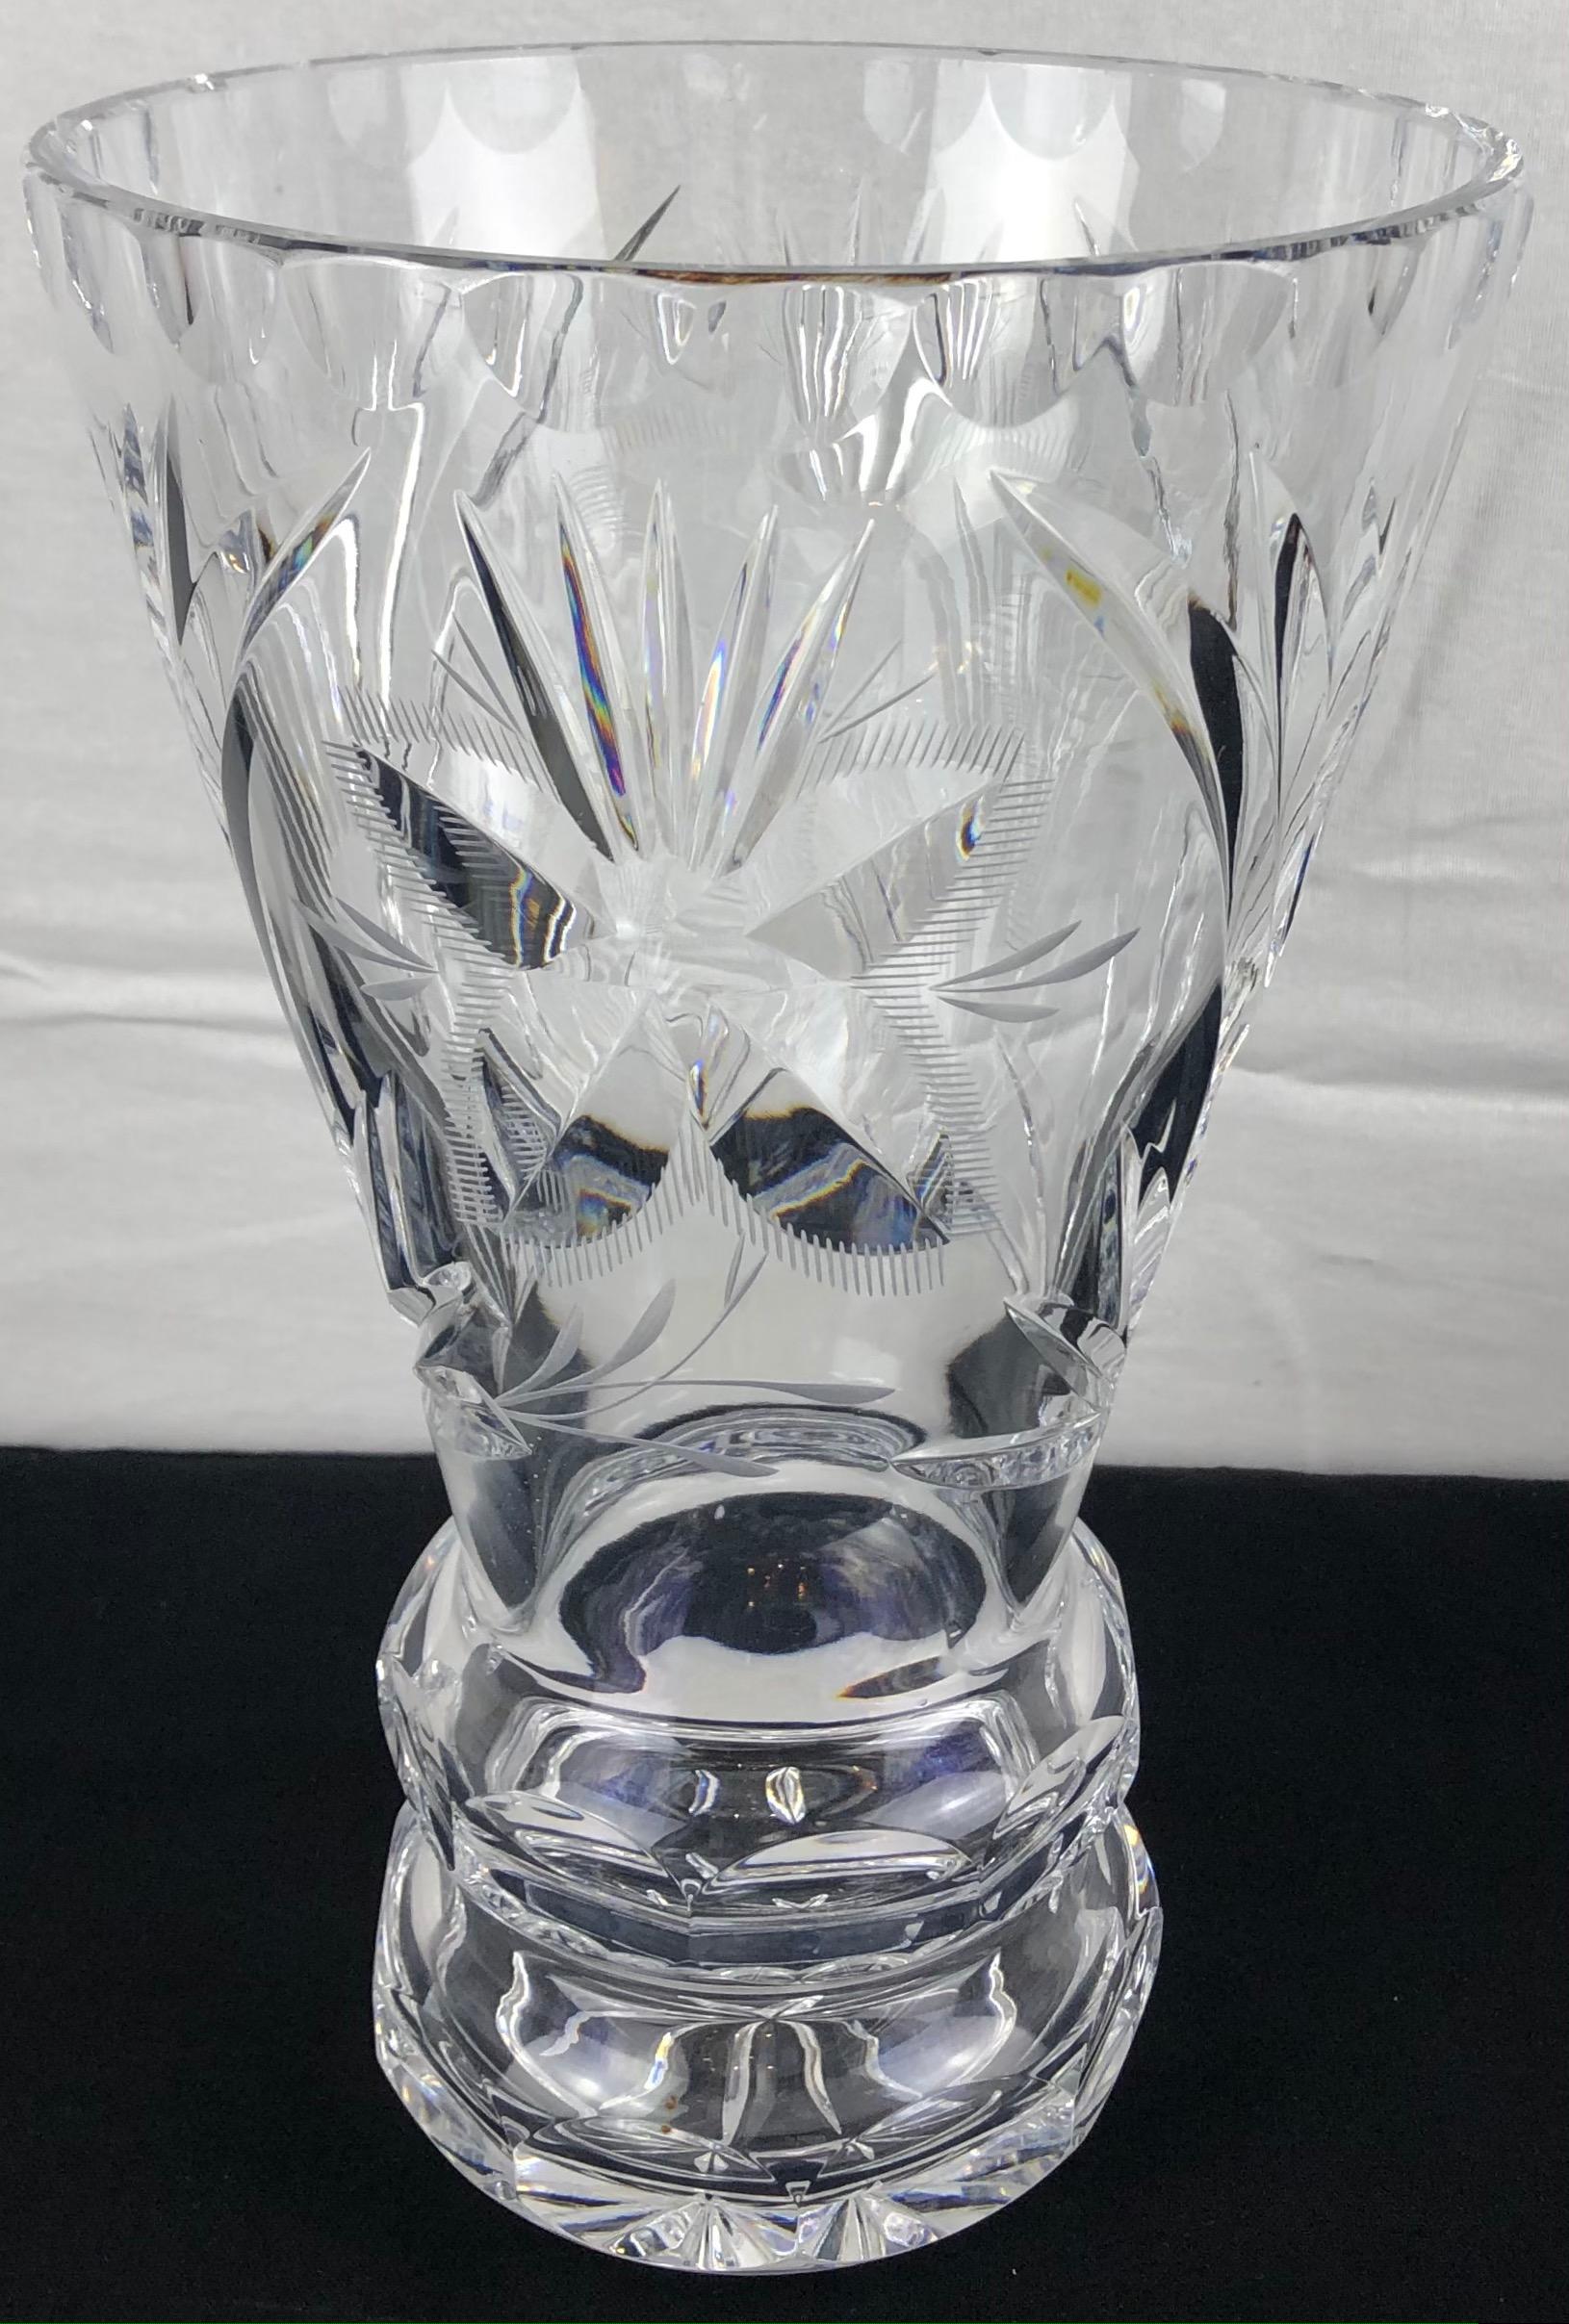 A fine French crystal vase that varies with a simple design to extraordinary details.
Delightfully heavy, very good quality crystal that chimes beautifully when tapped. 

Perfect condition. No chips or cracks. 
Diameter noted is at the widest